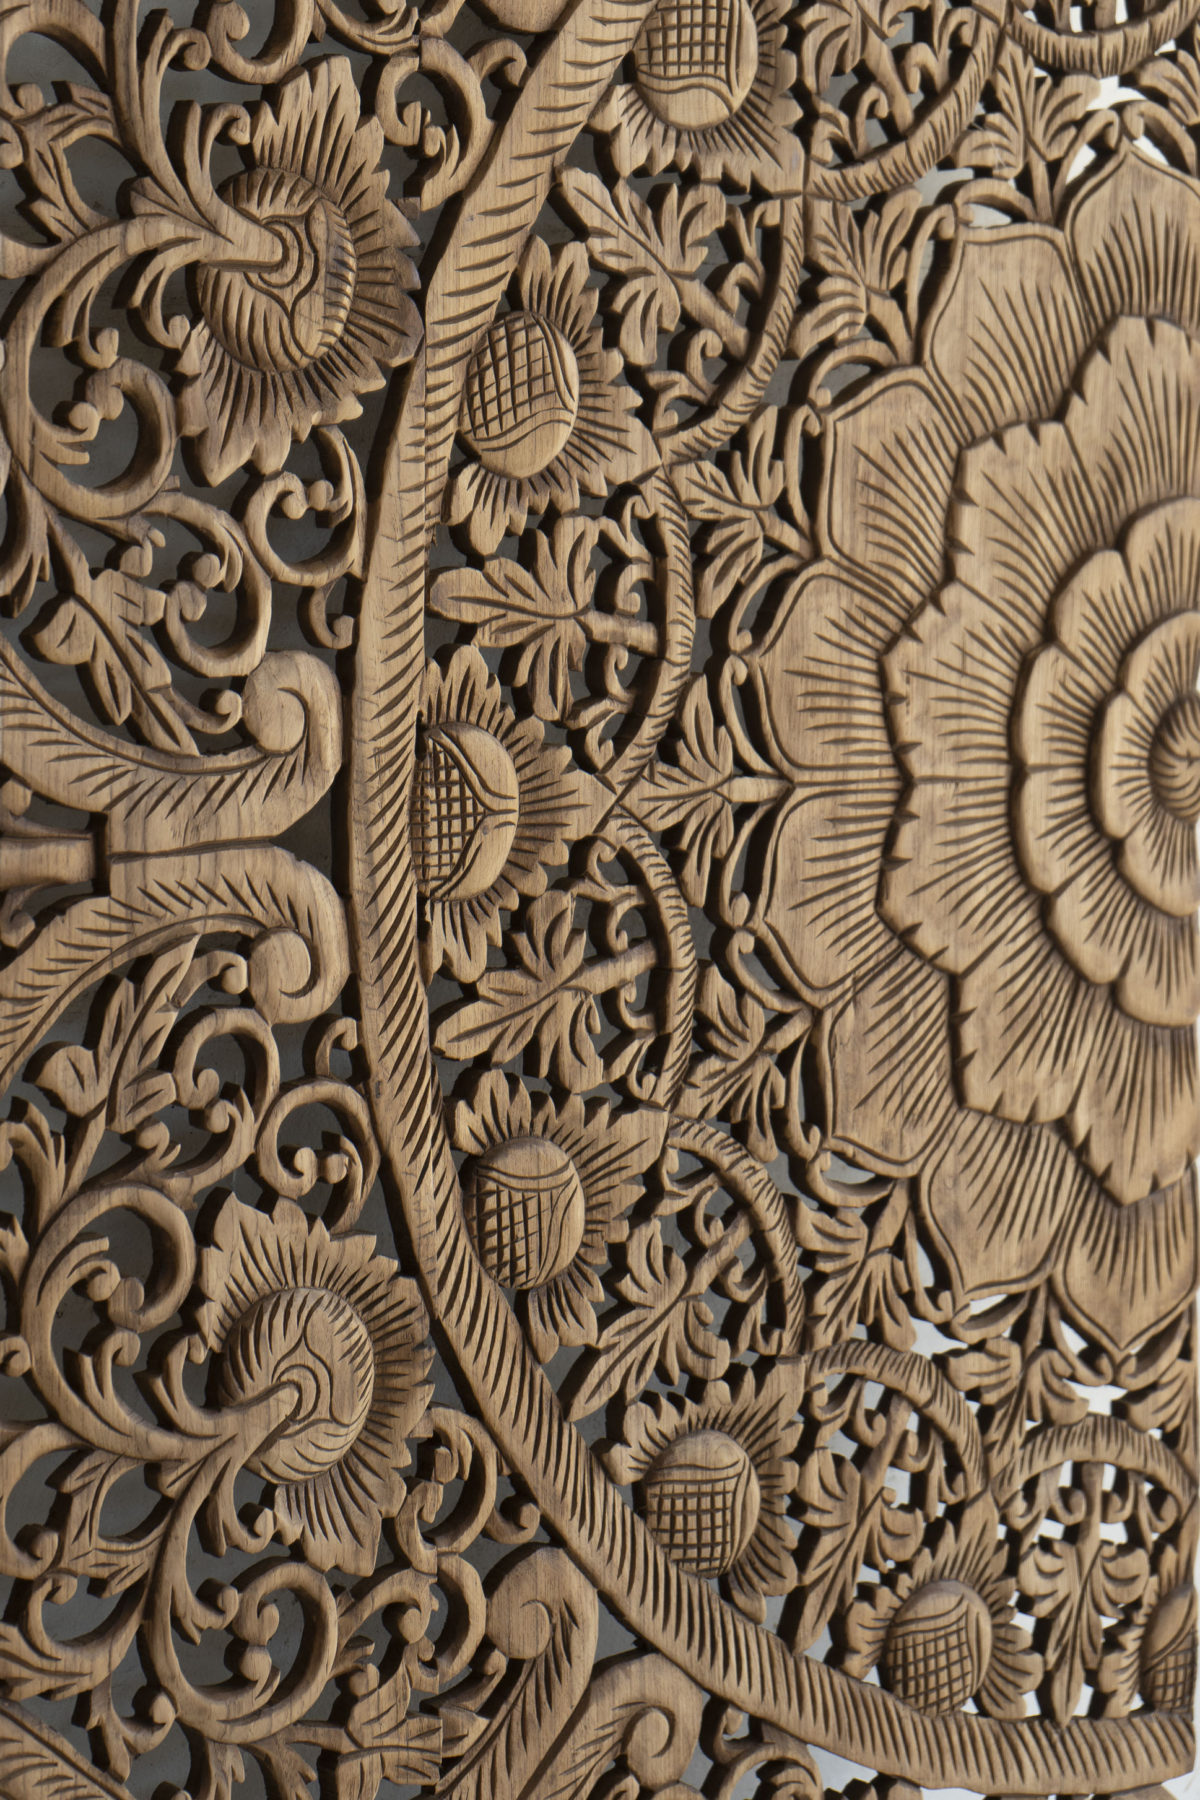 Wood wall art carved wall hanging